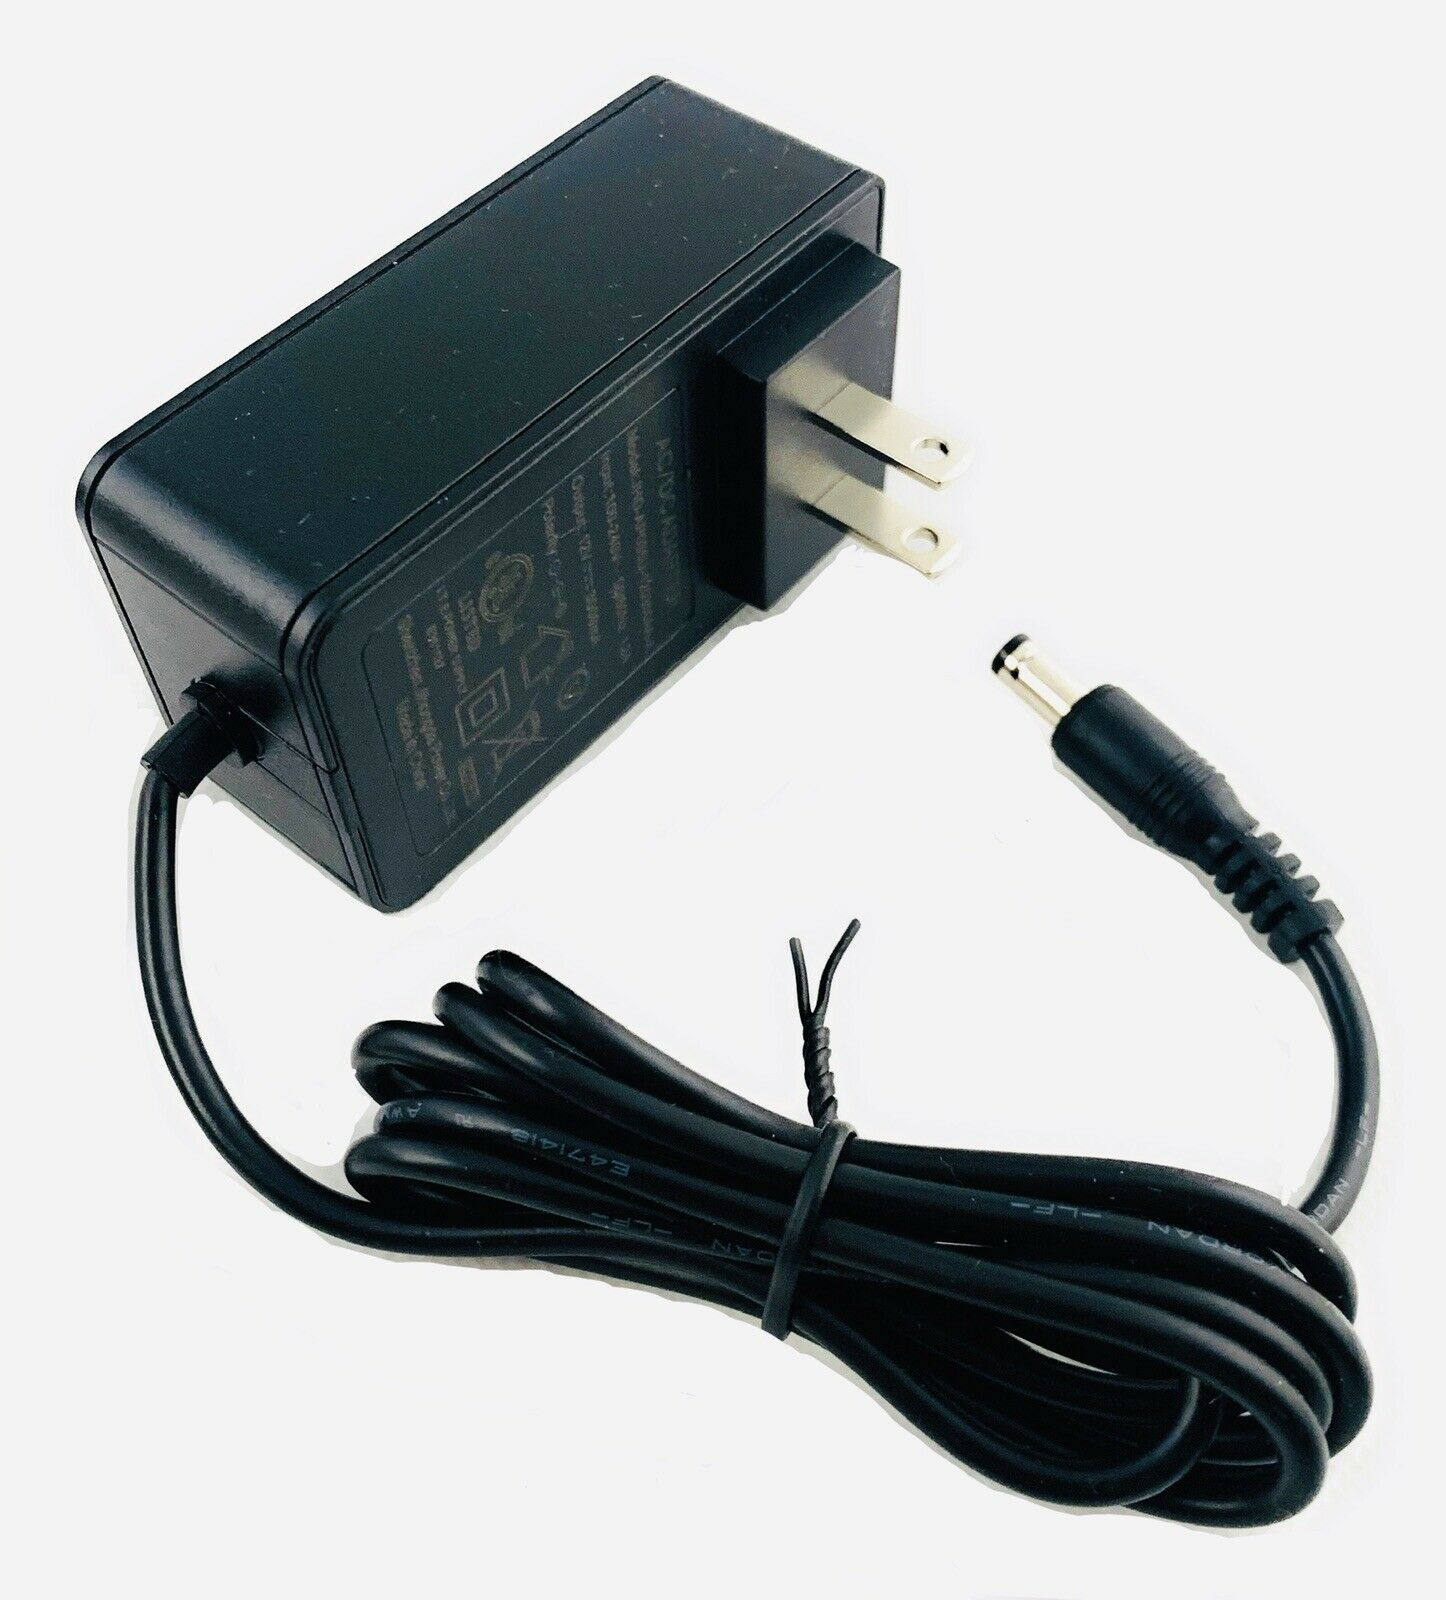 AC-DC Power Supply Adapter Charger, 100V-240V 1.2a Input, 12v 3A 3000mA Output Brand: Unbranded Type: AC/DC Adapter - Click Image to Close